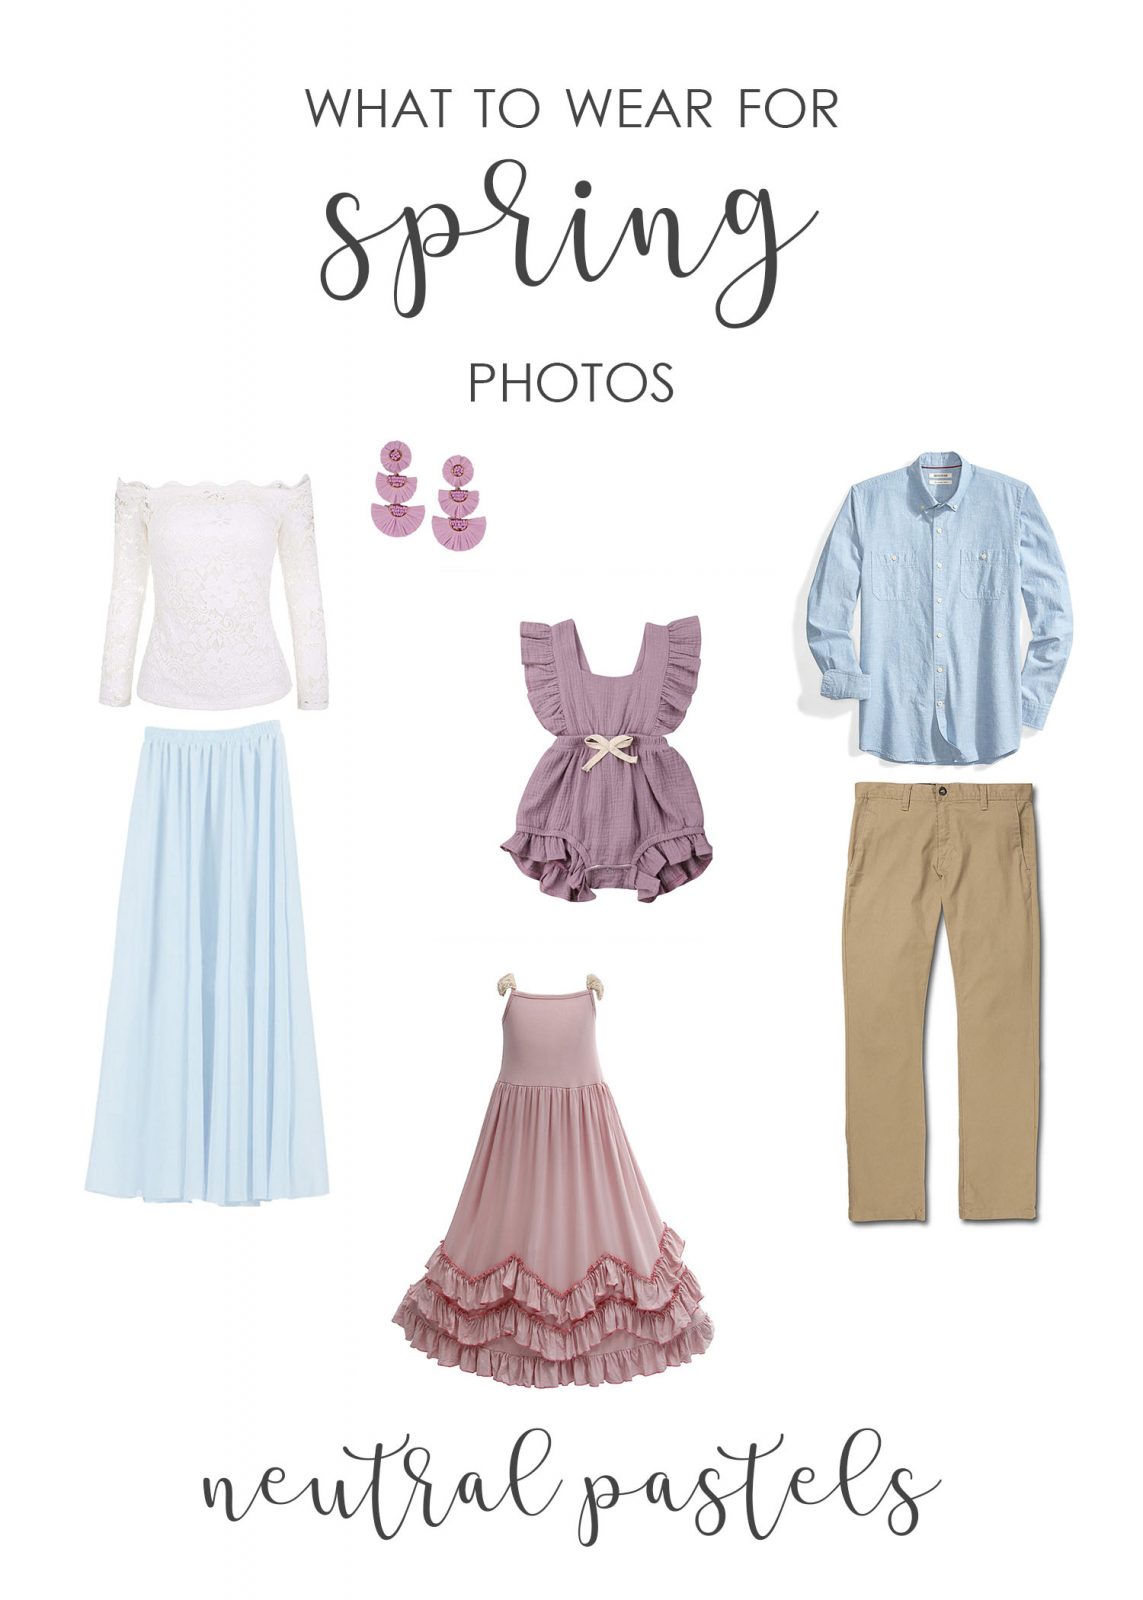 wardrobe idea for family pictures or engagement pictures - neutral pastels lavender chambray and rose